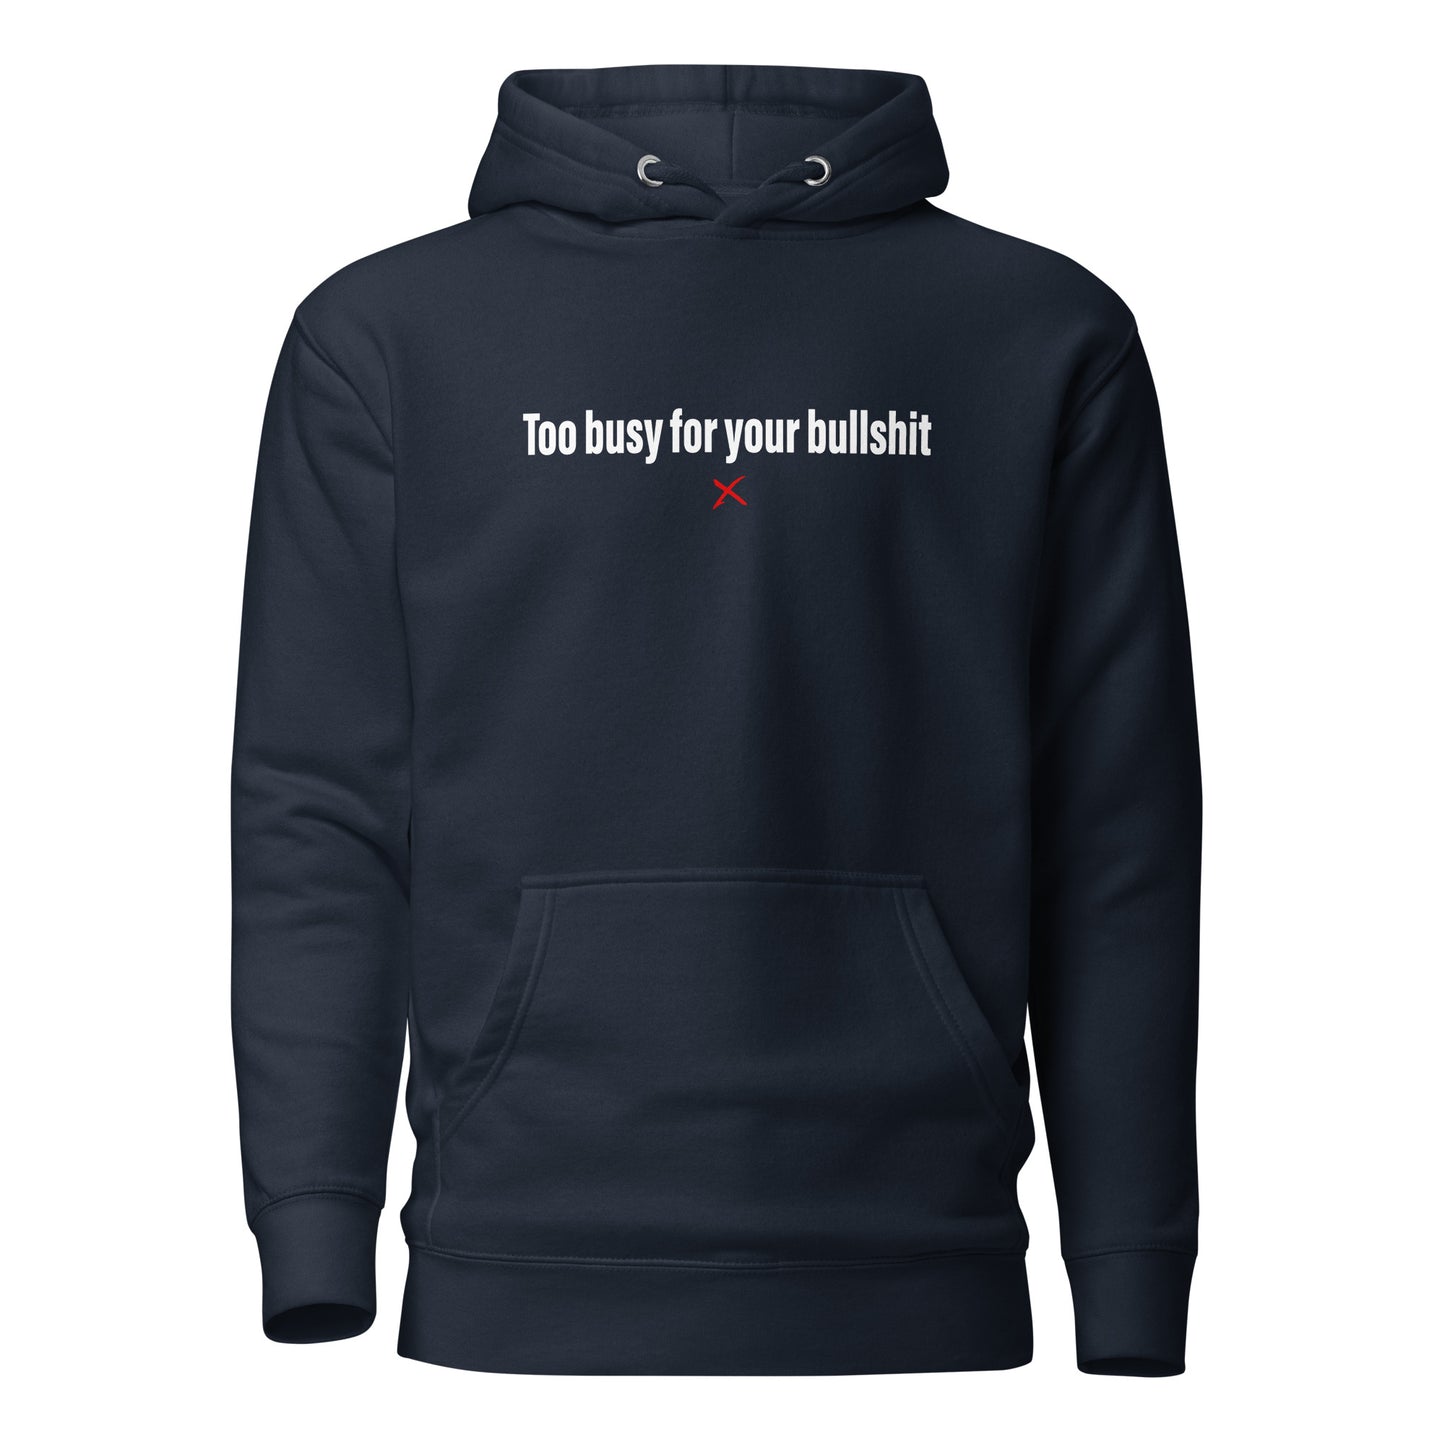 Too busy for your bullshit - Hoodie